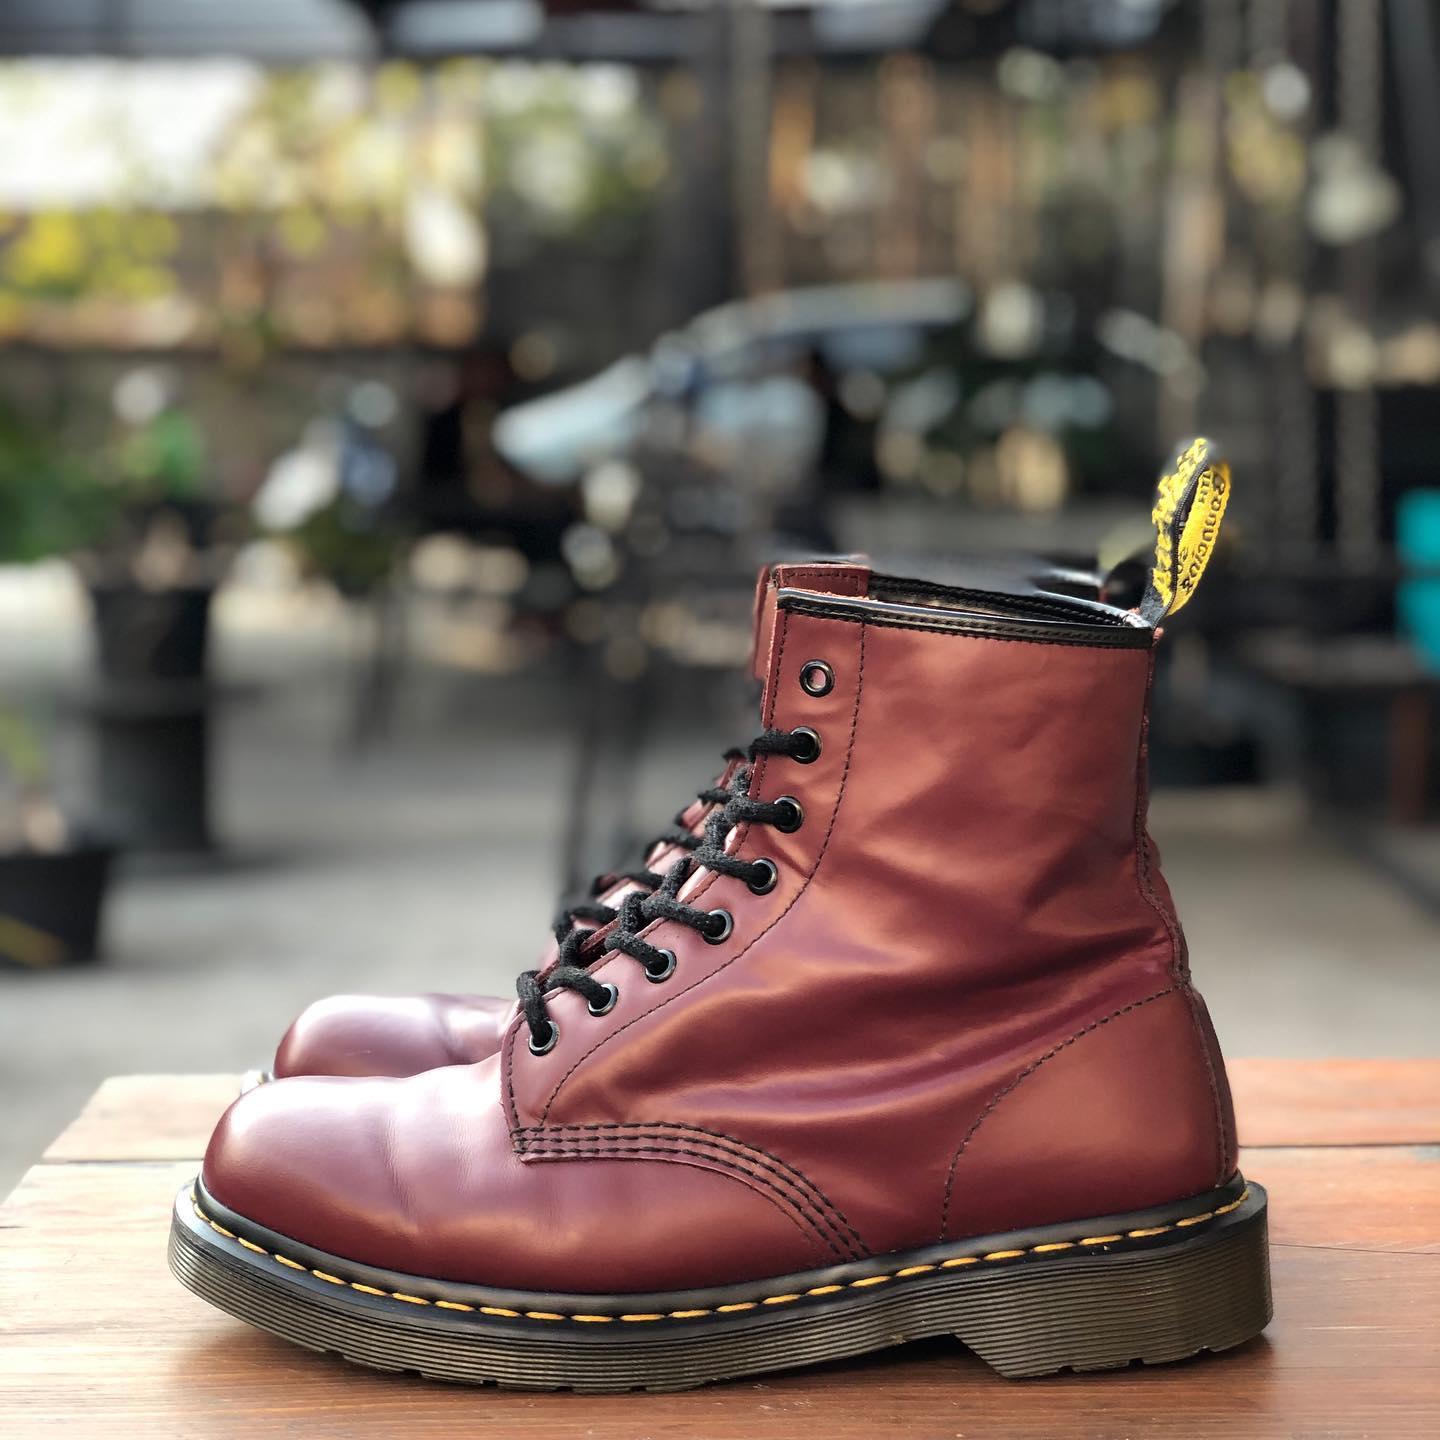 A pair of Dr Martens boots